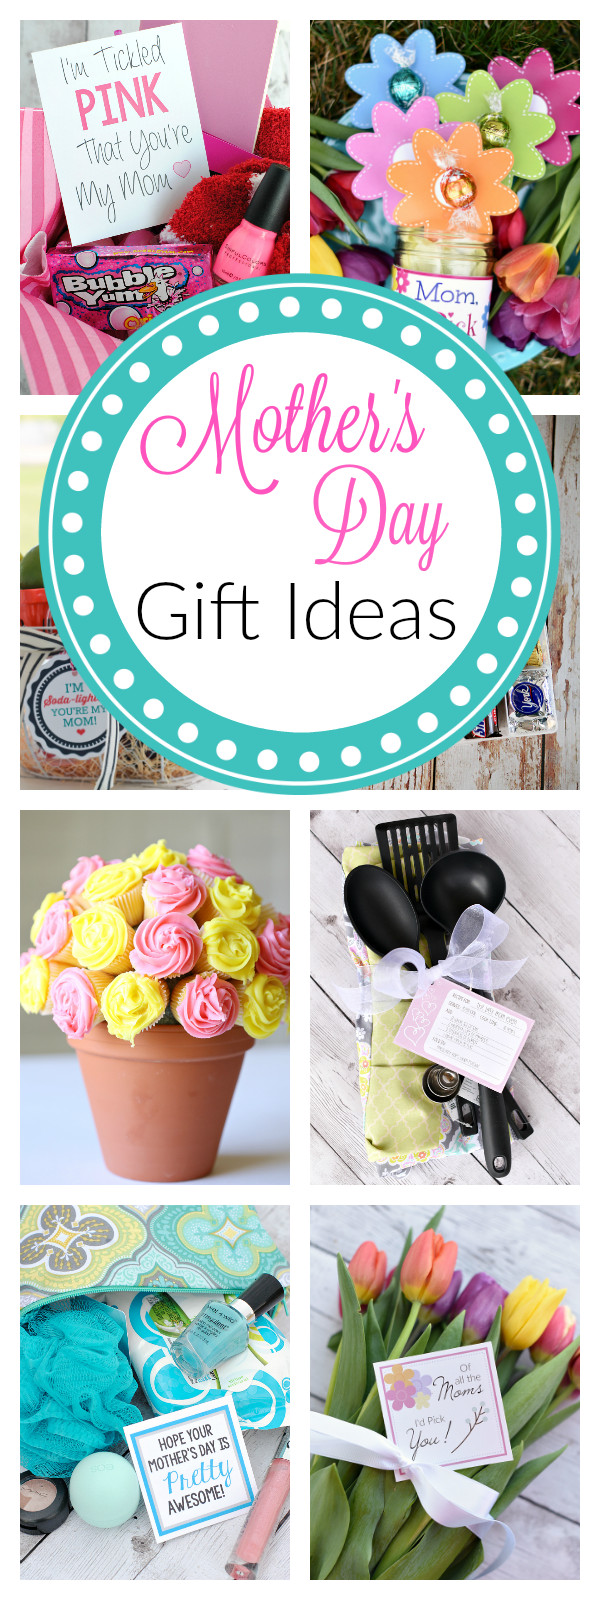 Mother's Day Gift Ideas Pinterest
 25 Fun Mother s Day Gift Ideas – Fun Squared